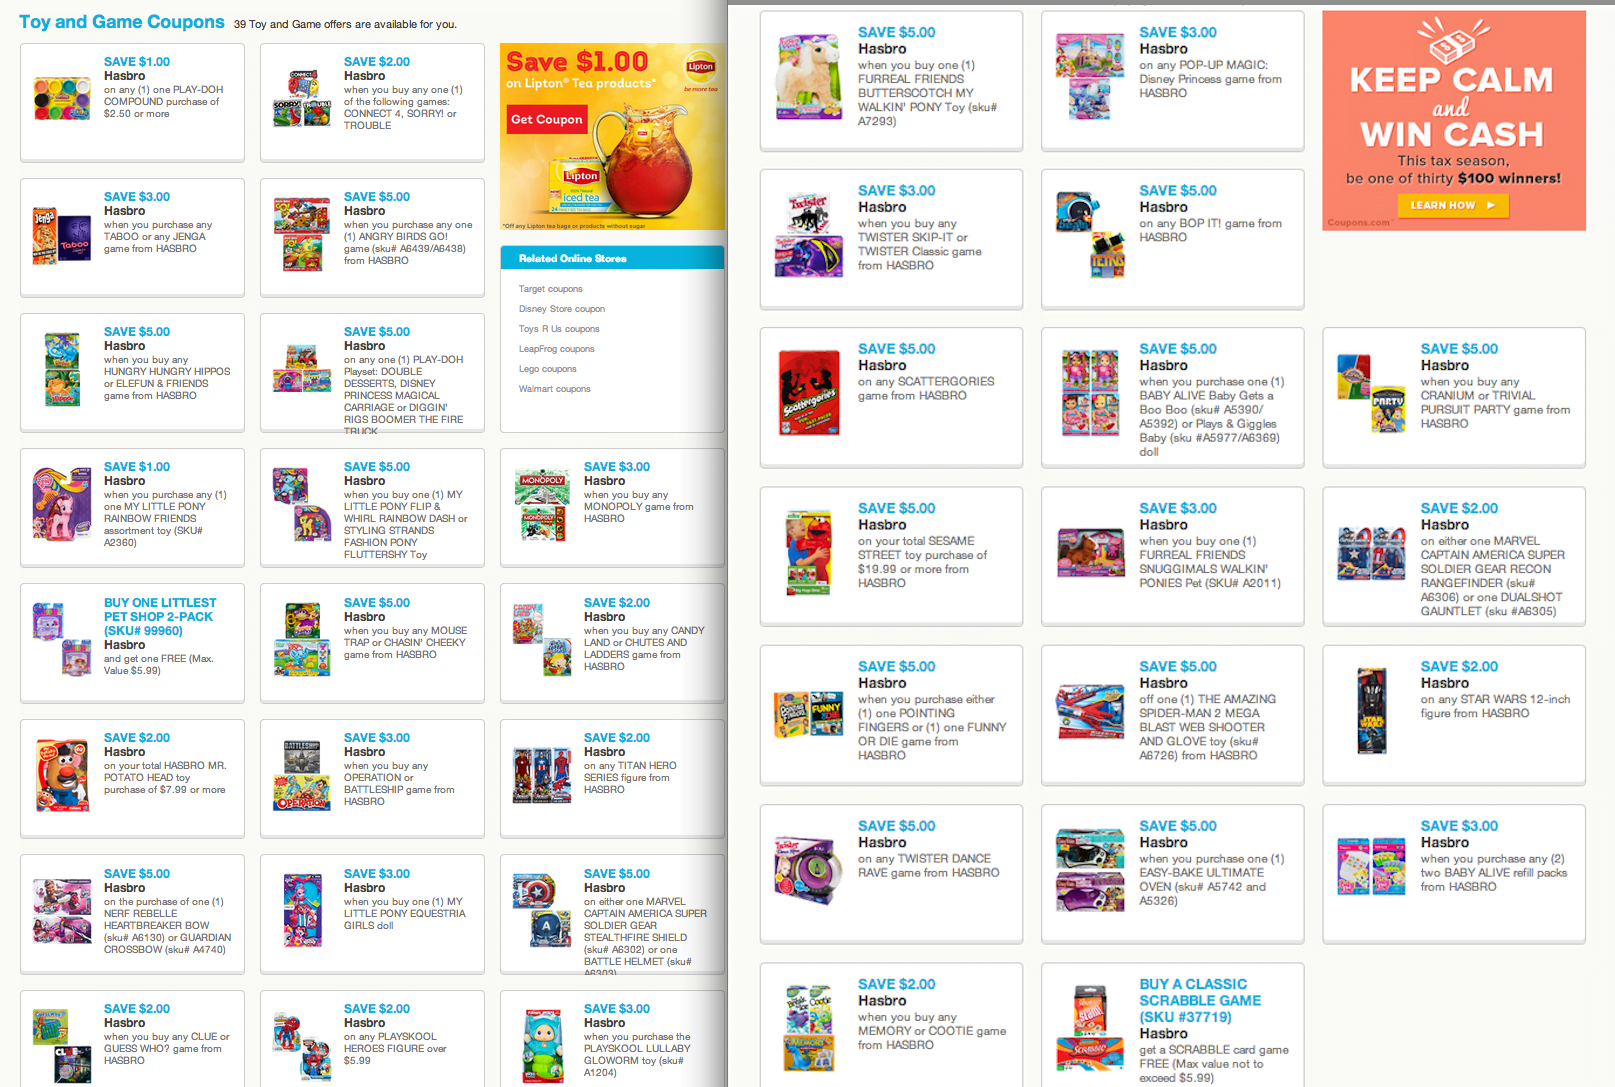 39 New Printable Toy Game Coupons From Hasbro Al